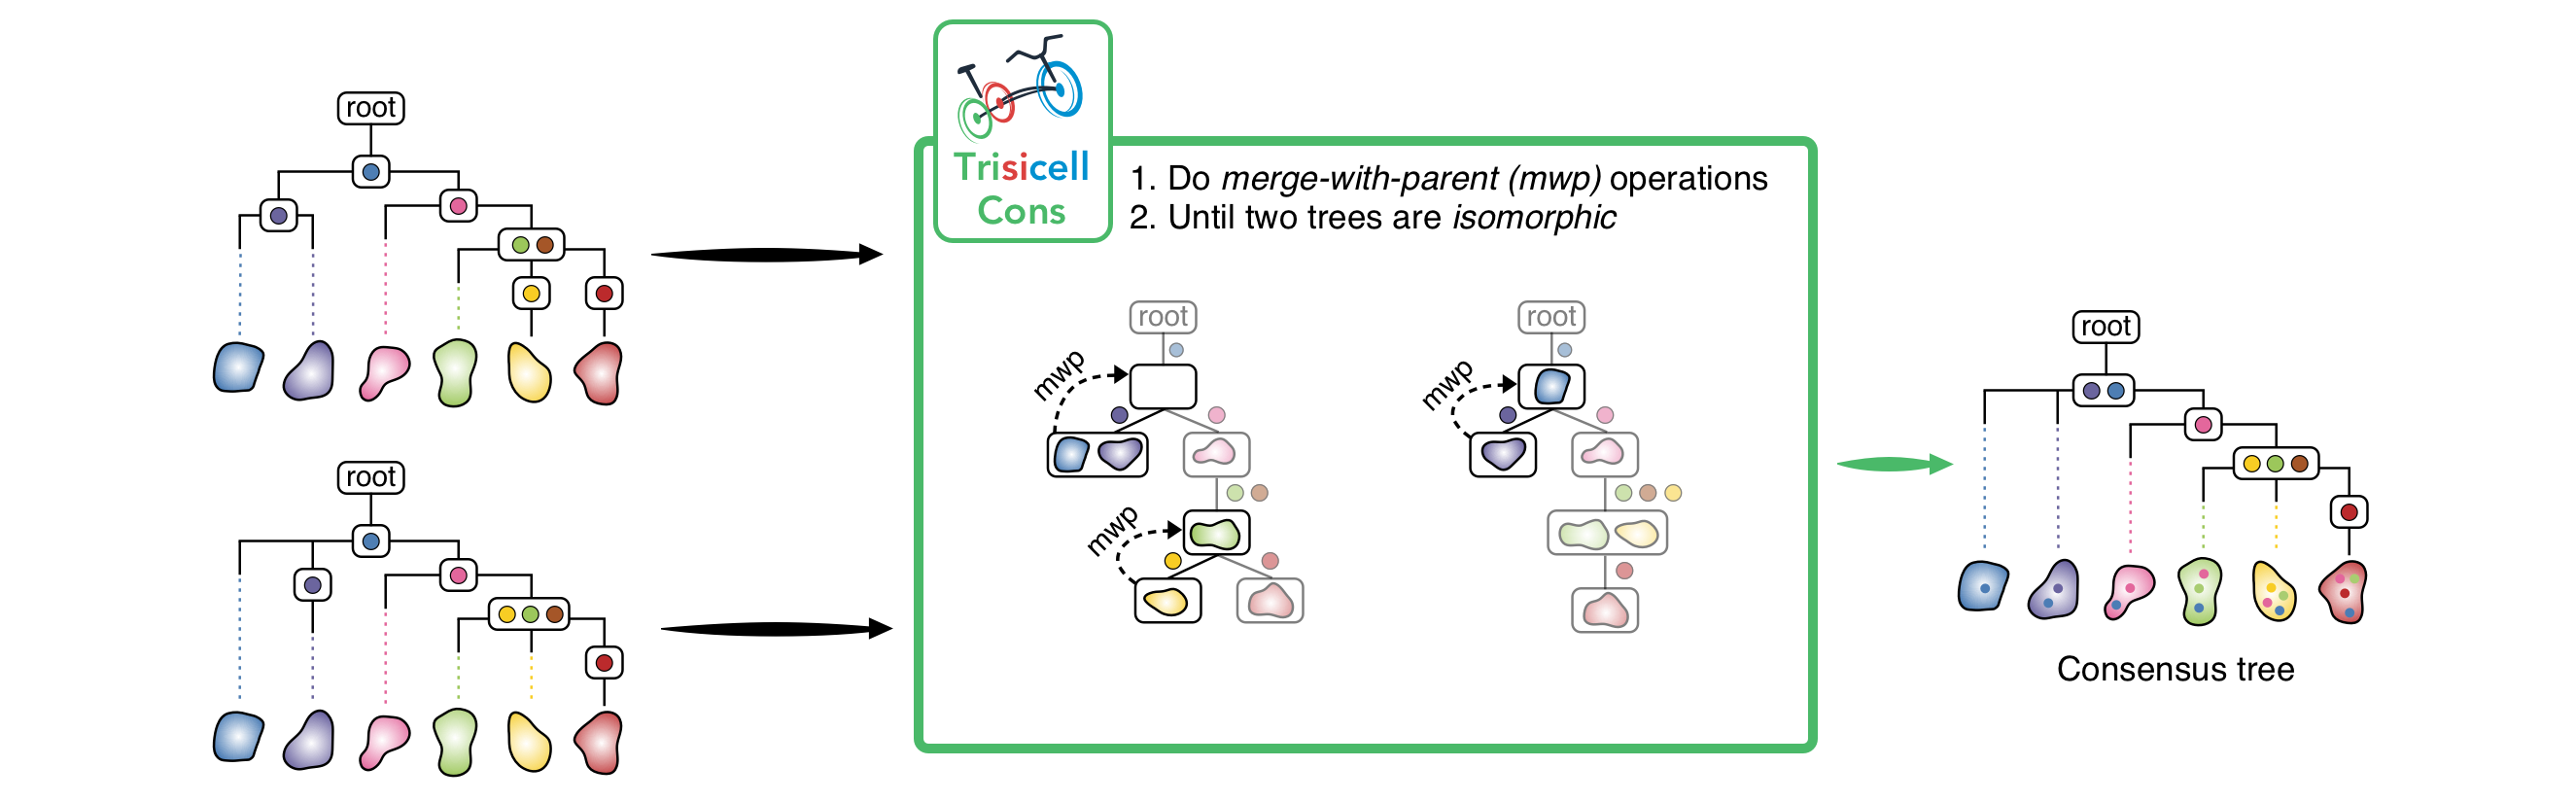 Trisicell-Cons